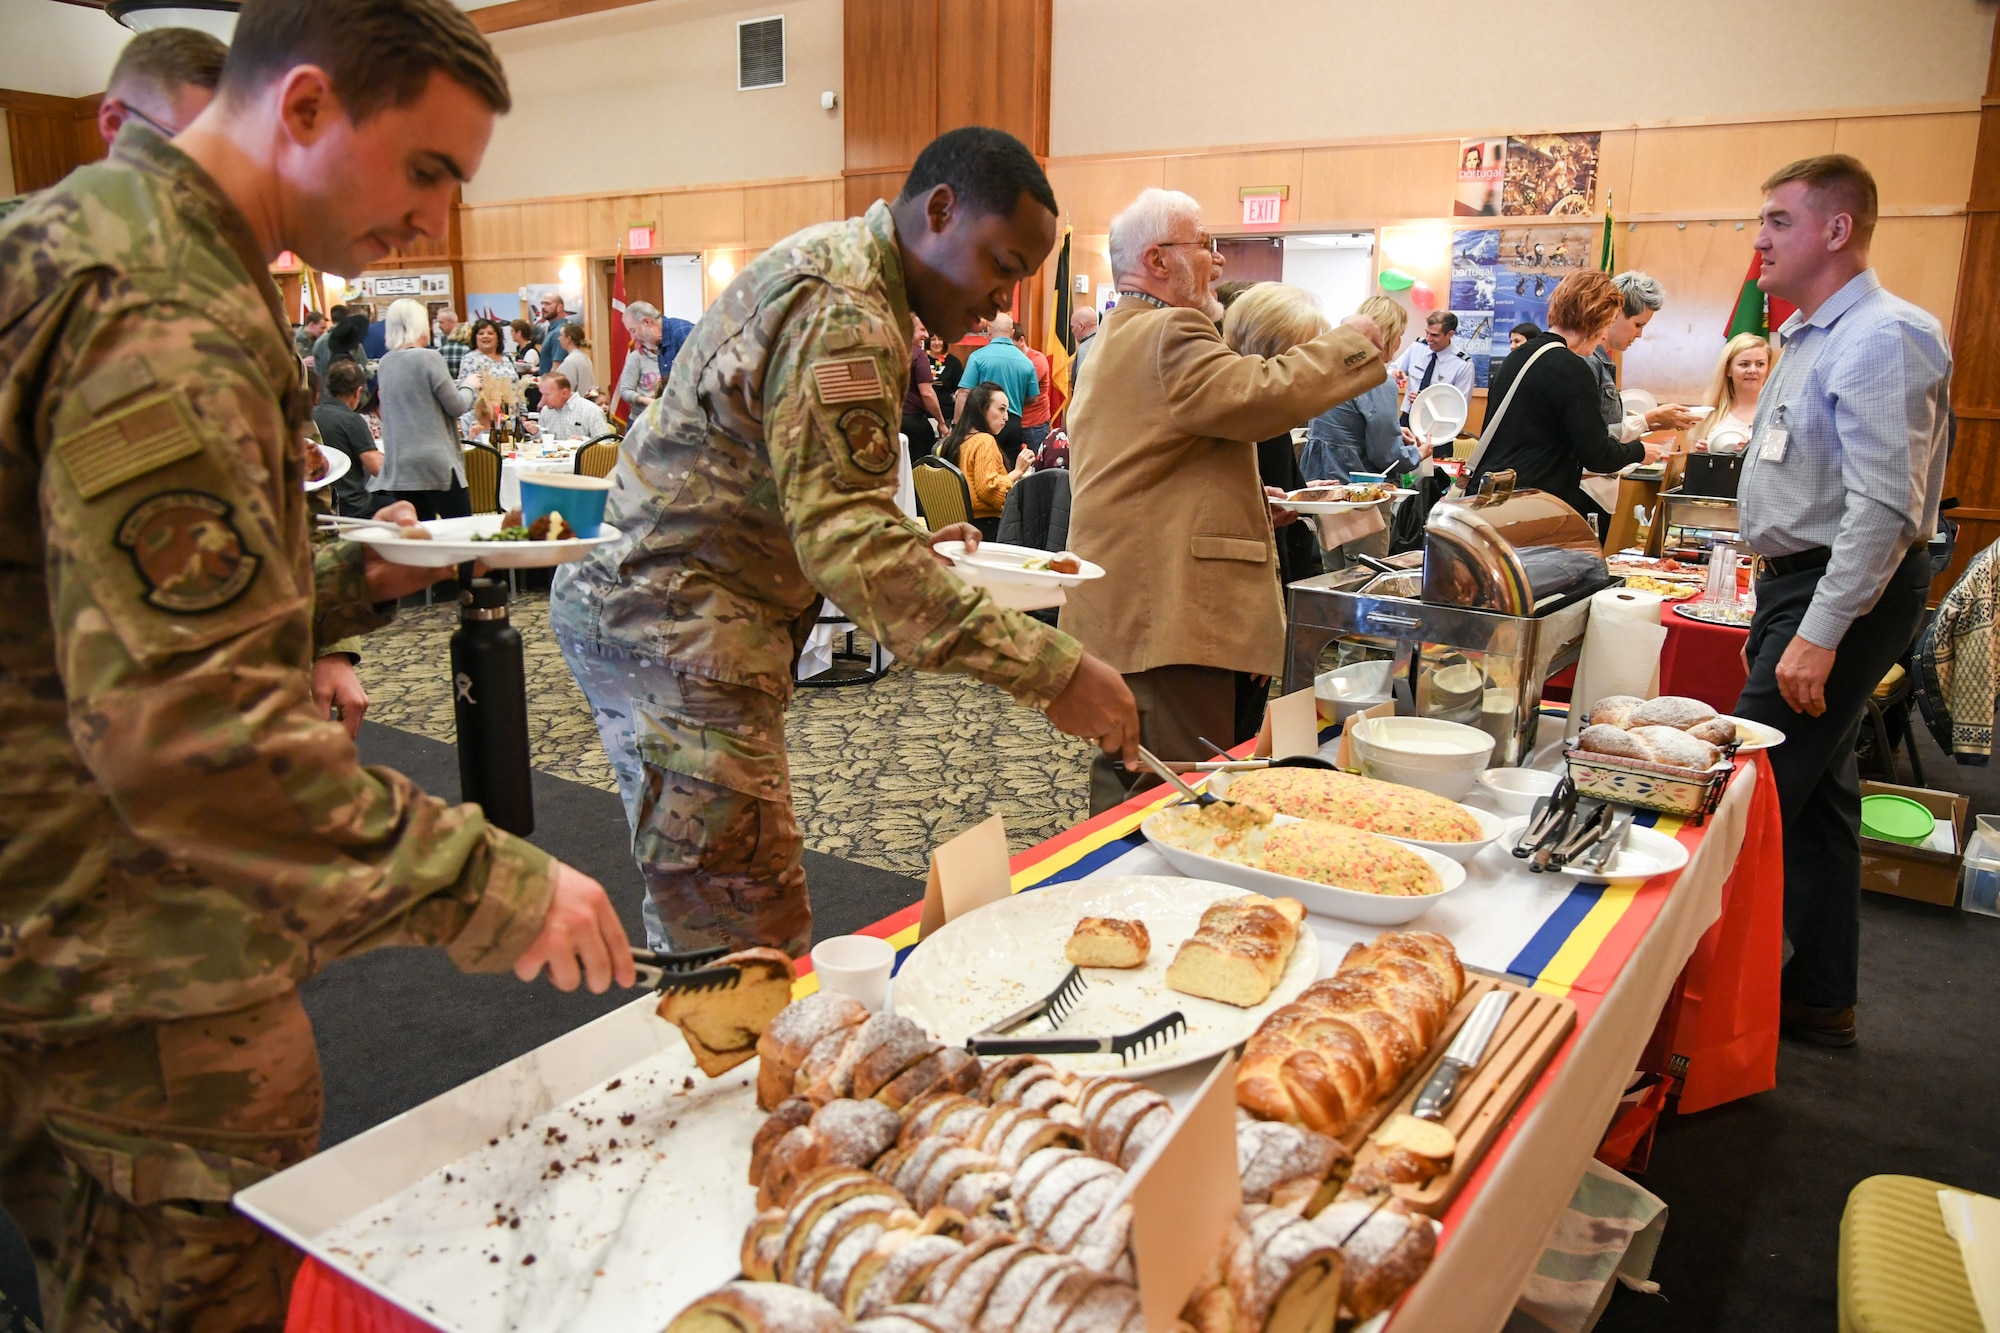 Attendees enjoy pastries and a vegetable casserole at the Romanian table at the International Culinary Tasting Buffet March 4, 2020, at Hill Air Force Base, Utah. The event was hosted by the Hill AFB foreign liaison officers and featured food, drinks, and cultural education from 15 different countries. (U.S. Air Force photo by Cynthia Griggs)